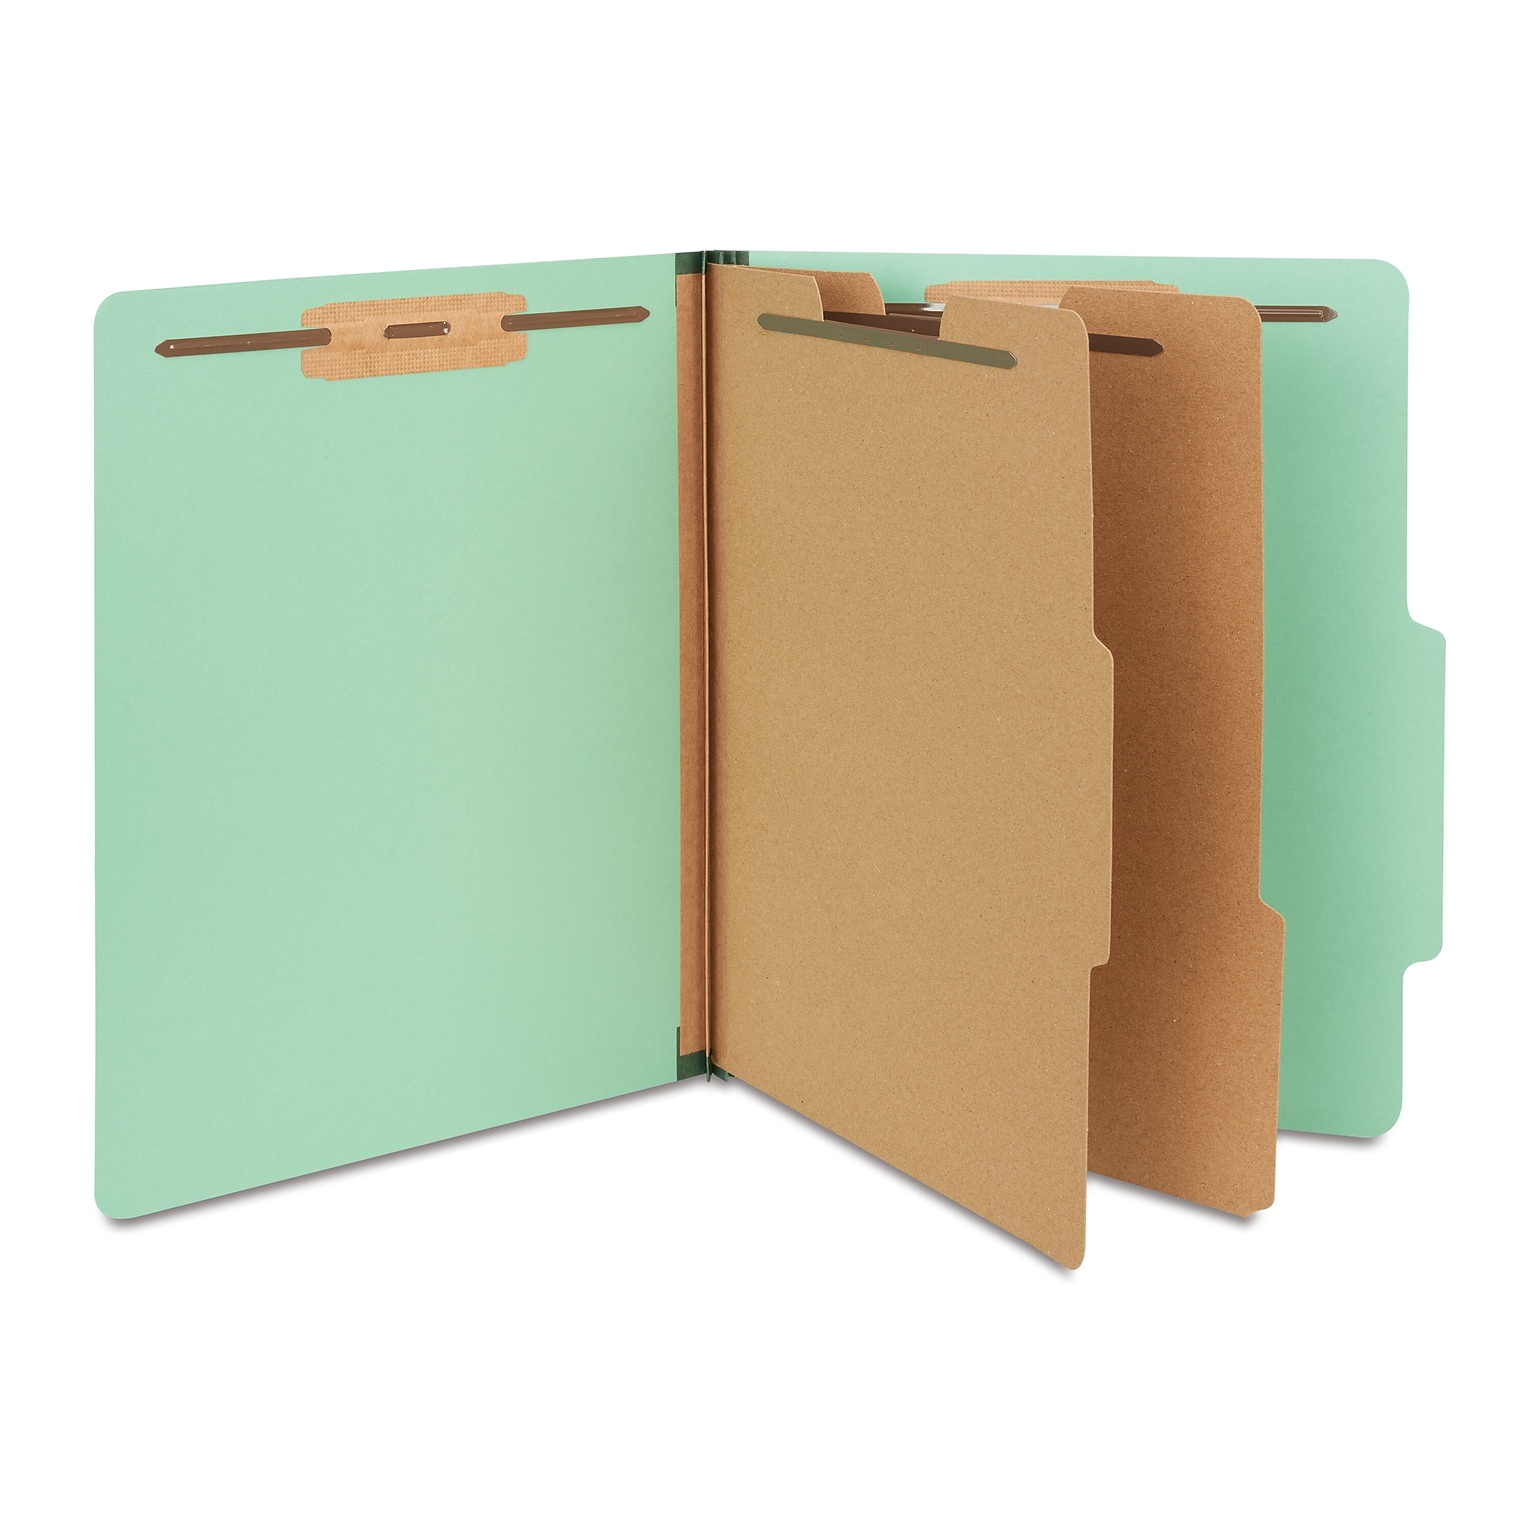 Staples 60% Recycled Pressboard Classification Folder, 2-Dividers, 2.5 Expansion, Letter Size, Light Green, 20/Box